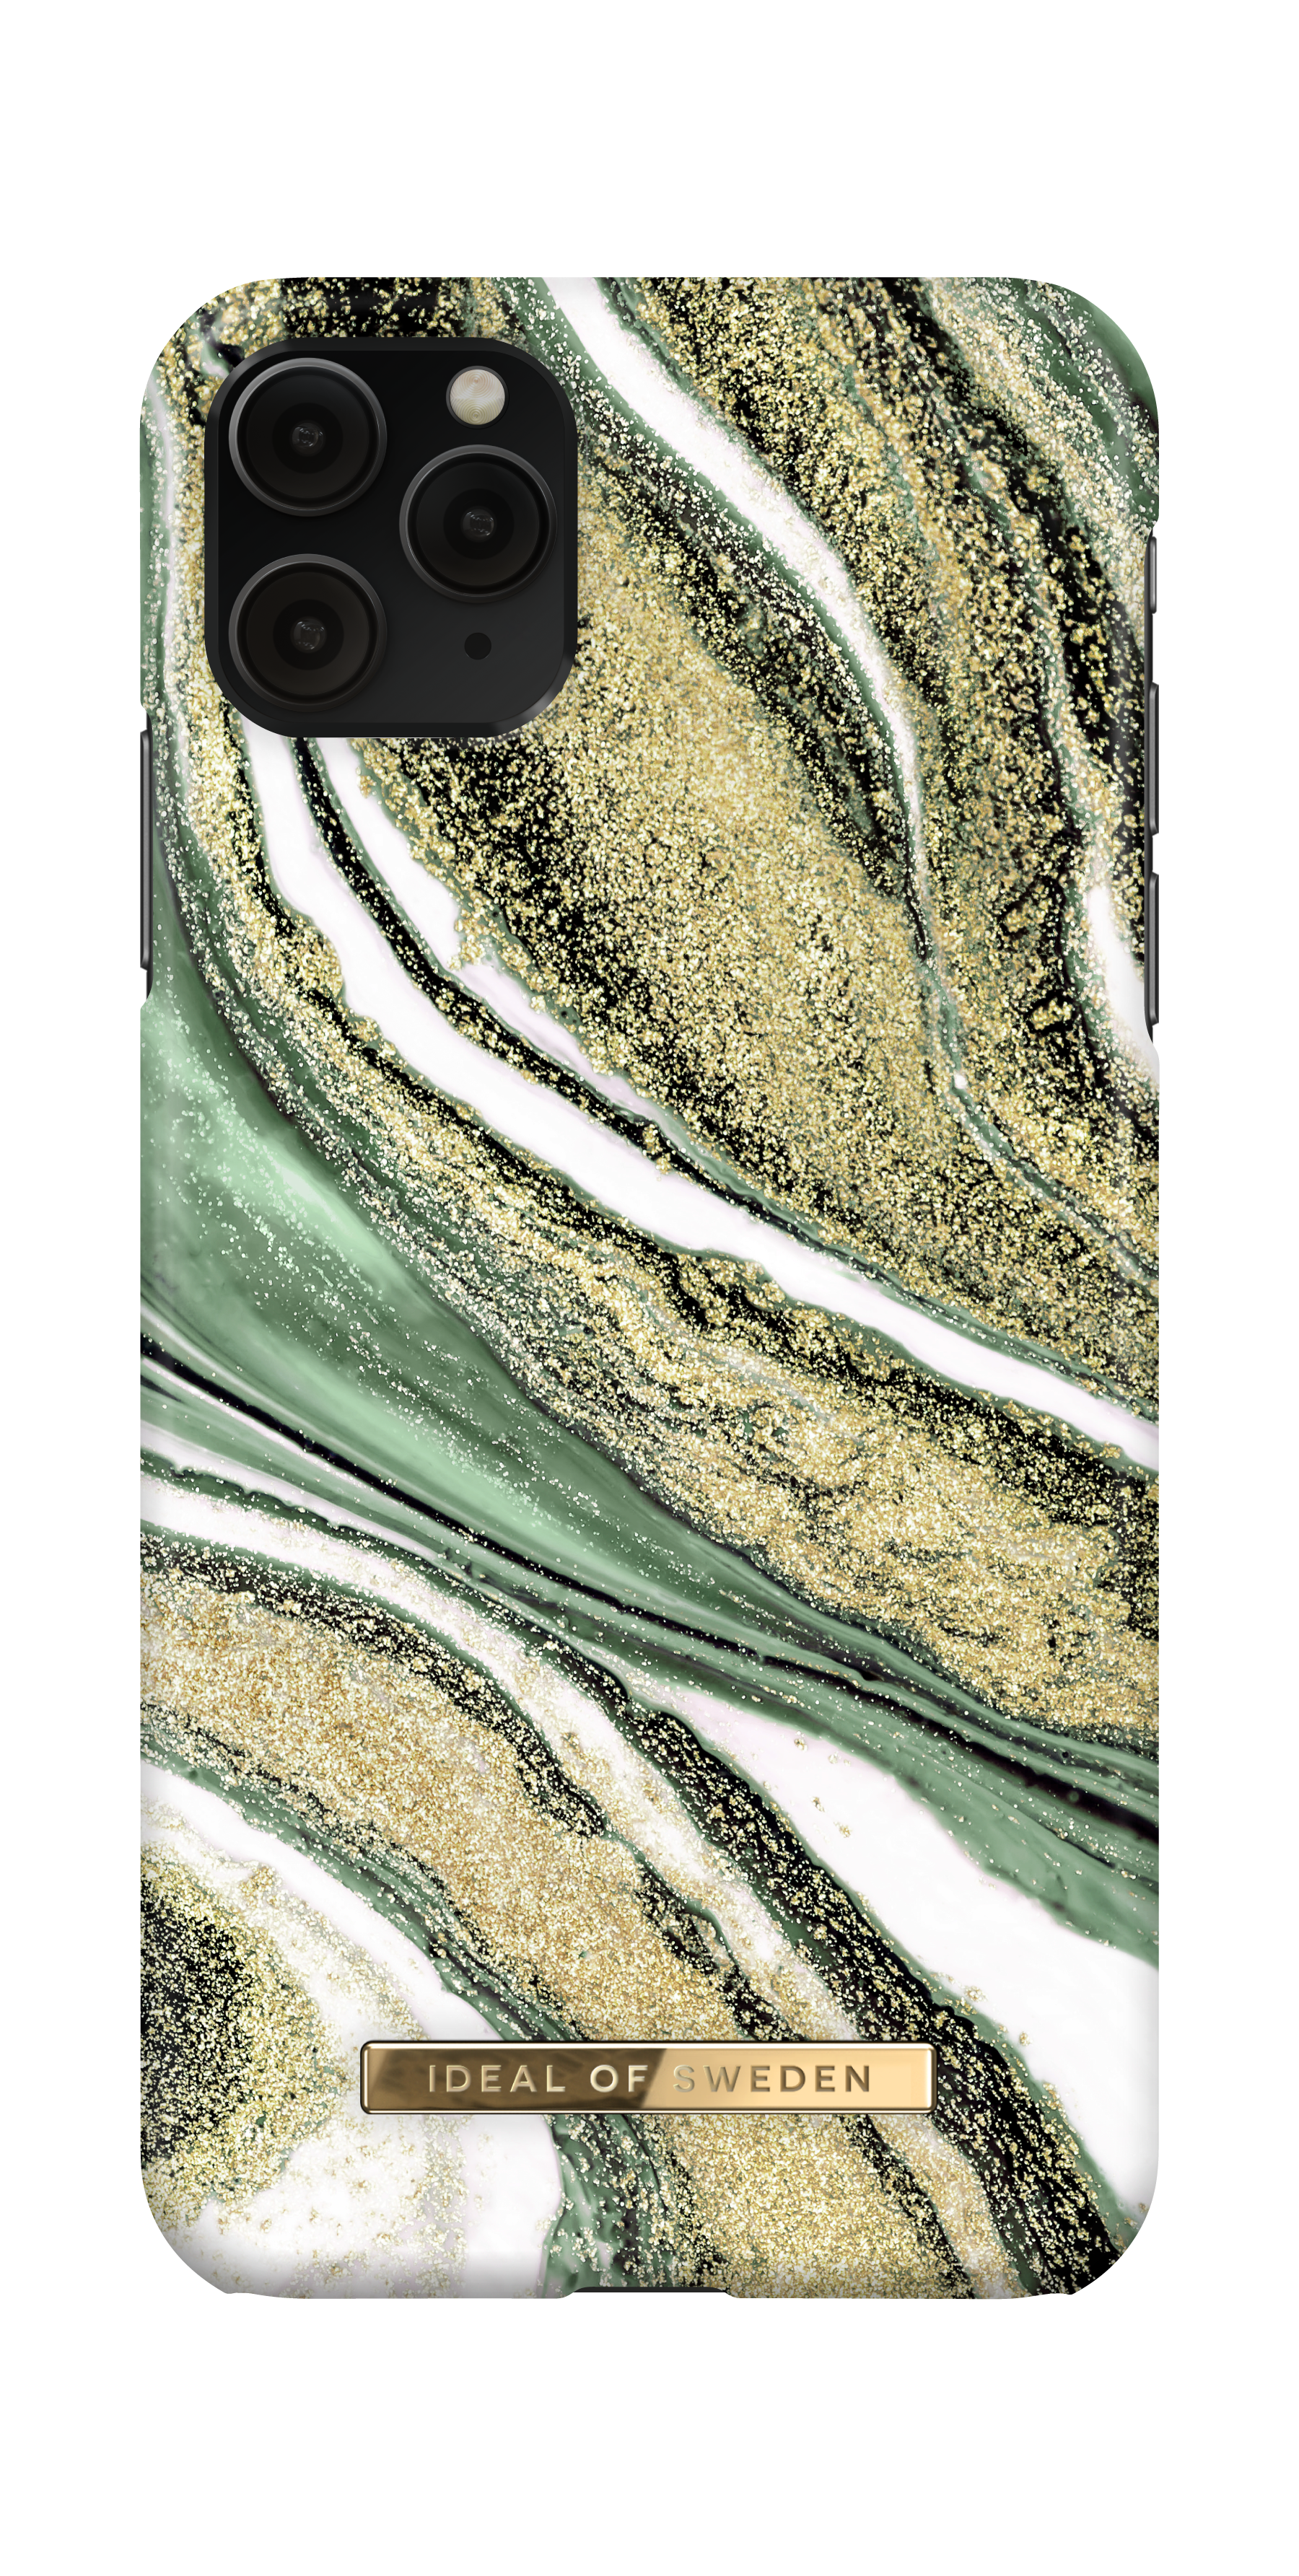 IDEAL OF XS Green 11 Max, iPhone Backcover, IDFCSS20-I1965-192, Apple, Cosmic iPhone Pro SWEDEN Max, Swirl